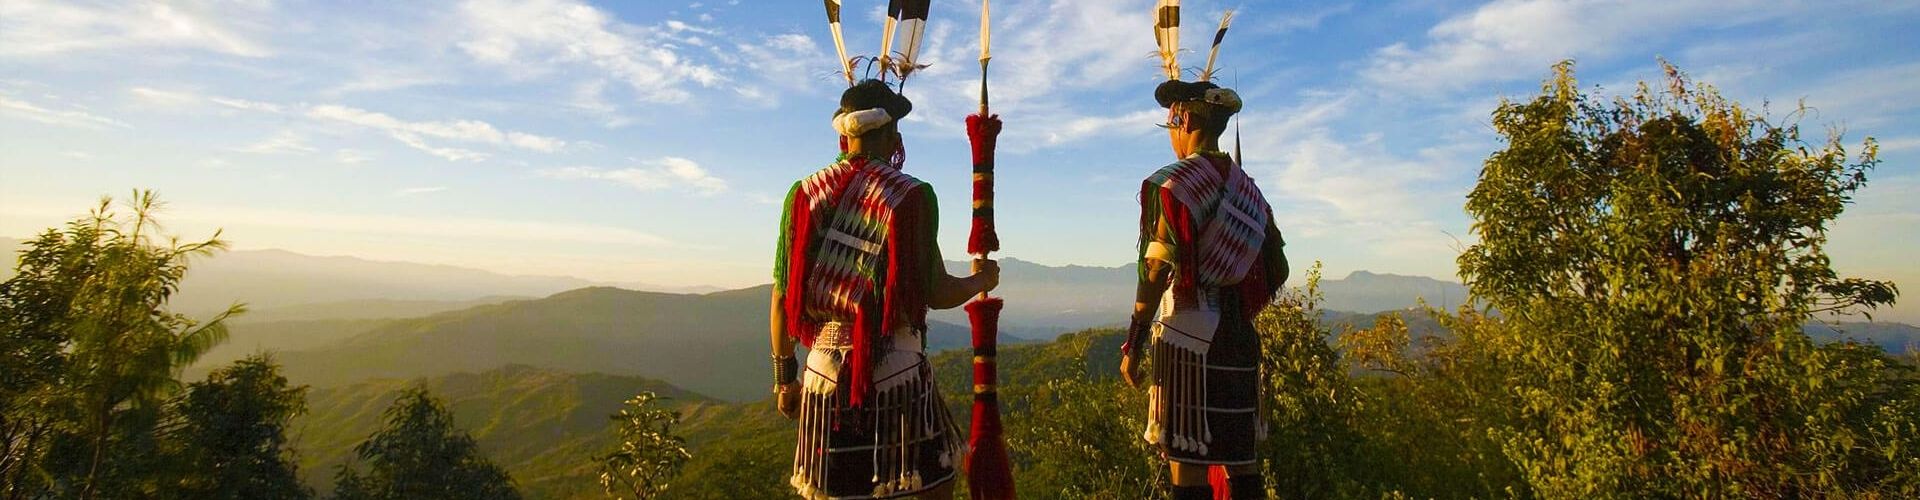 Best Selling Nagaland Tour Package